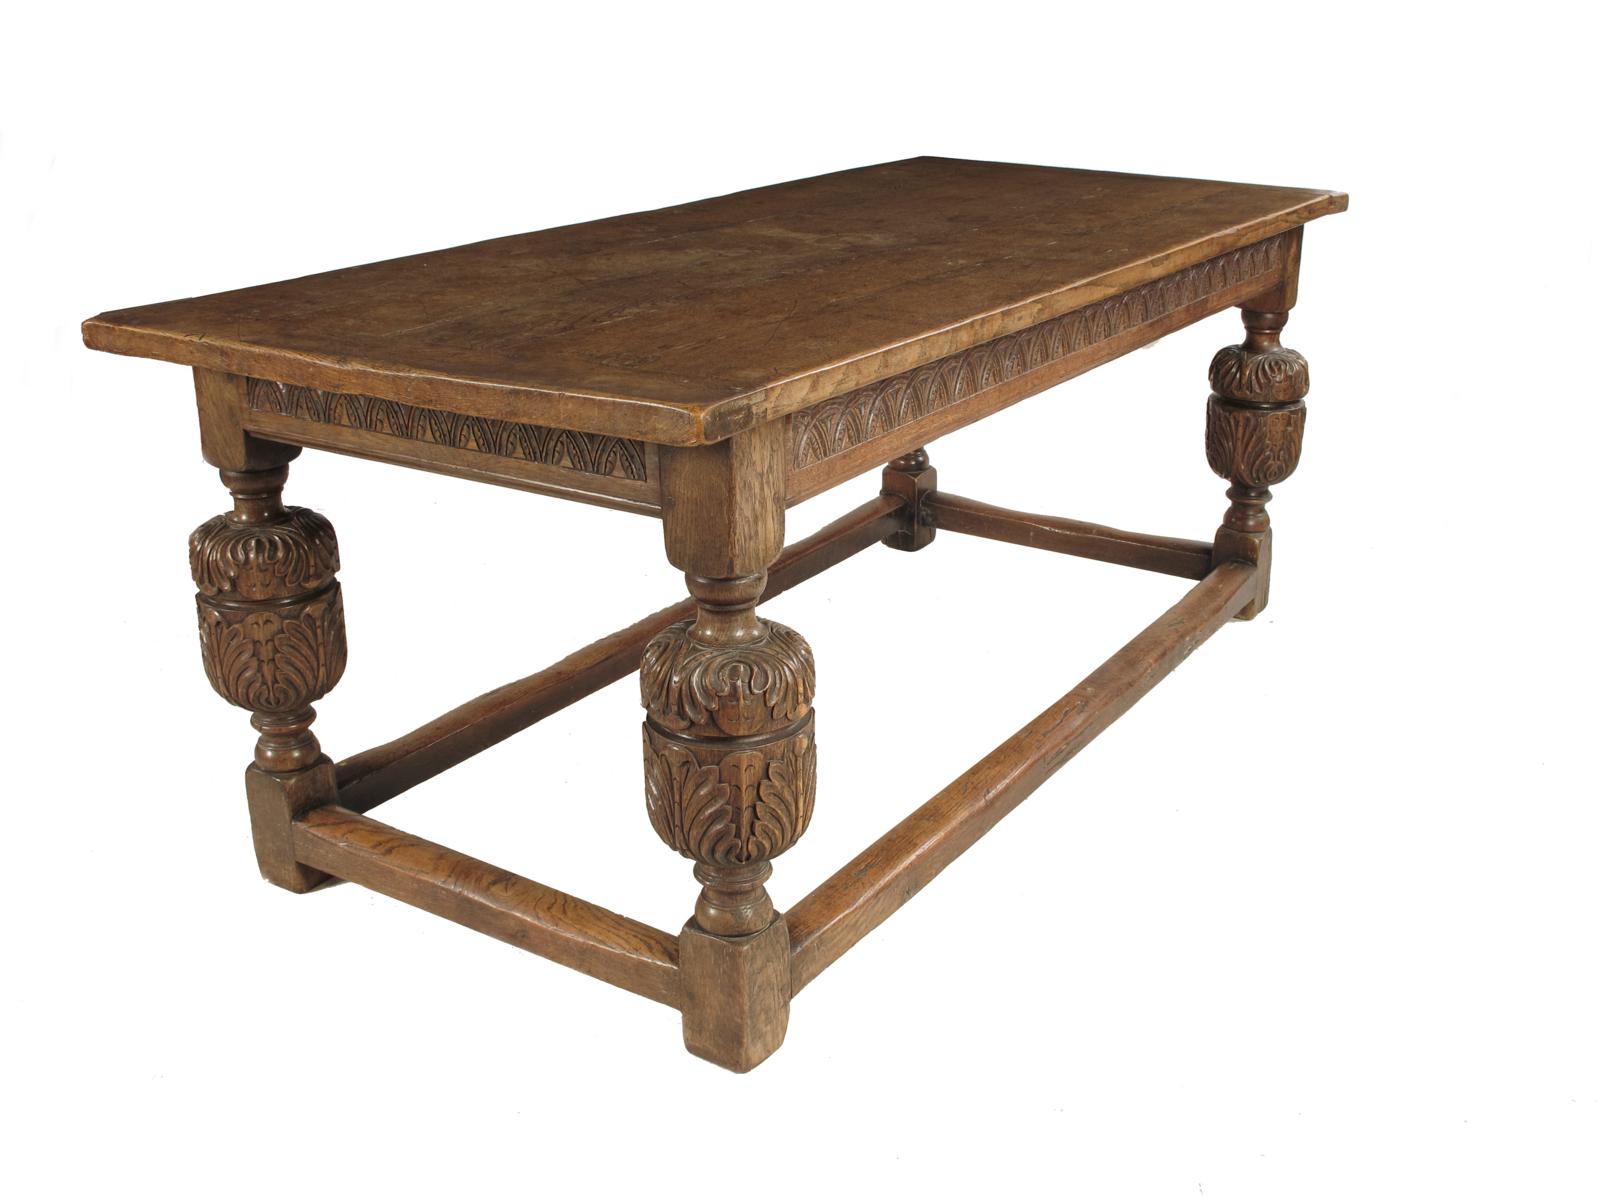 A joined oak refectory table, in 17th century style, with a cleated boarded top, above a carved